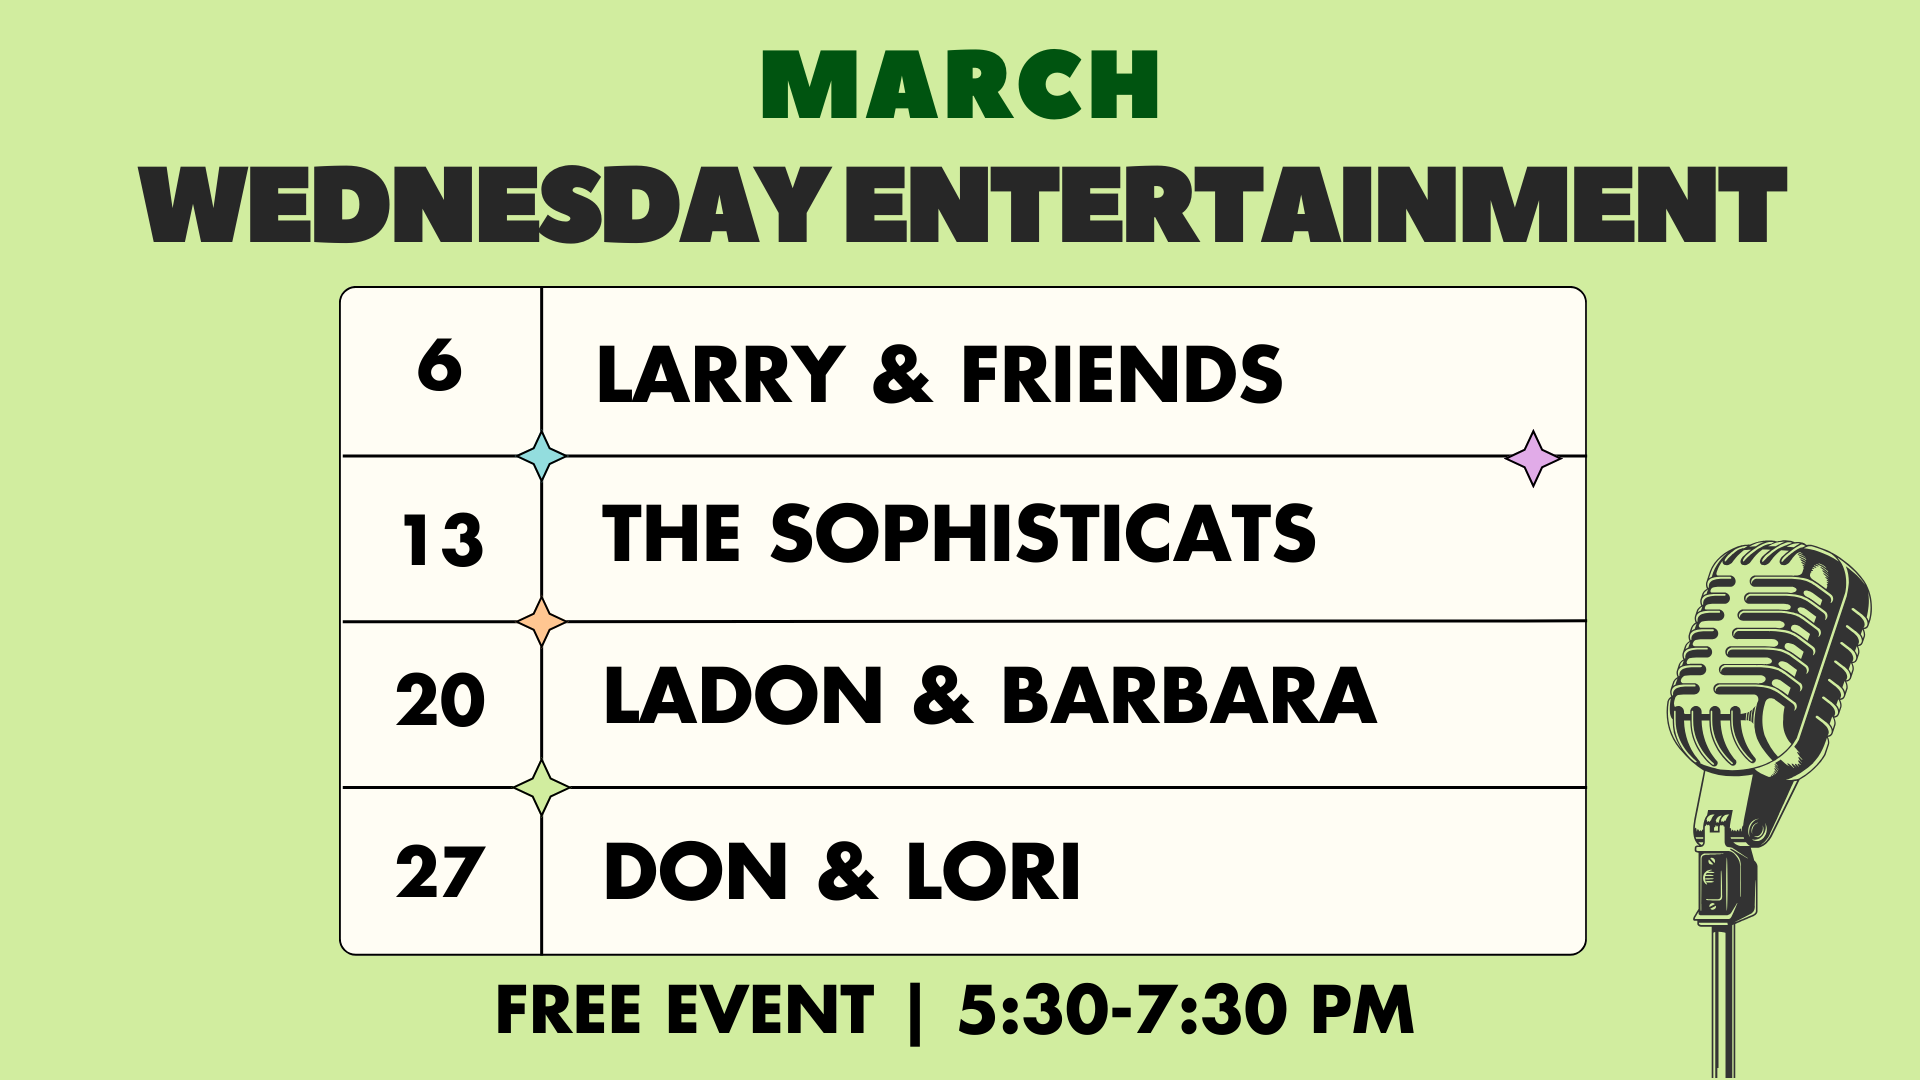 March Wednesday Entertainment